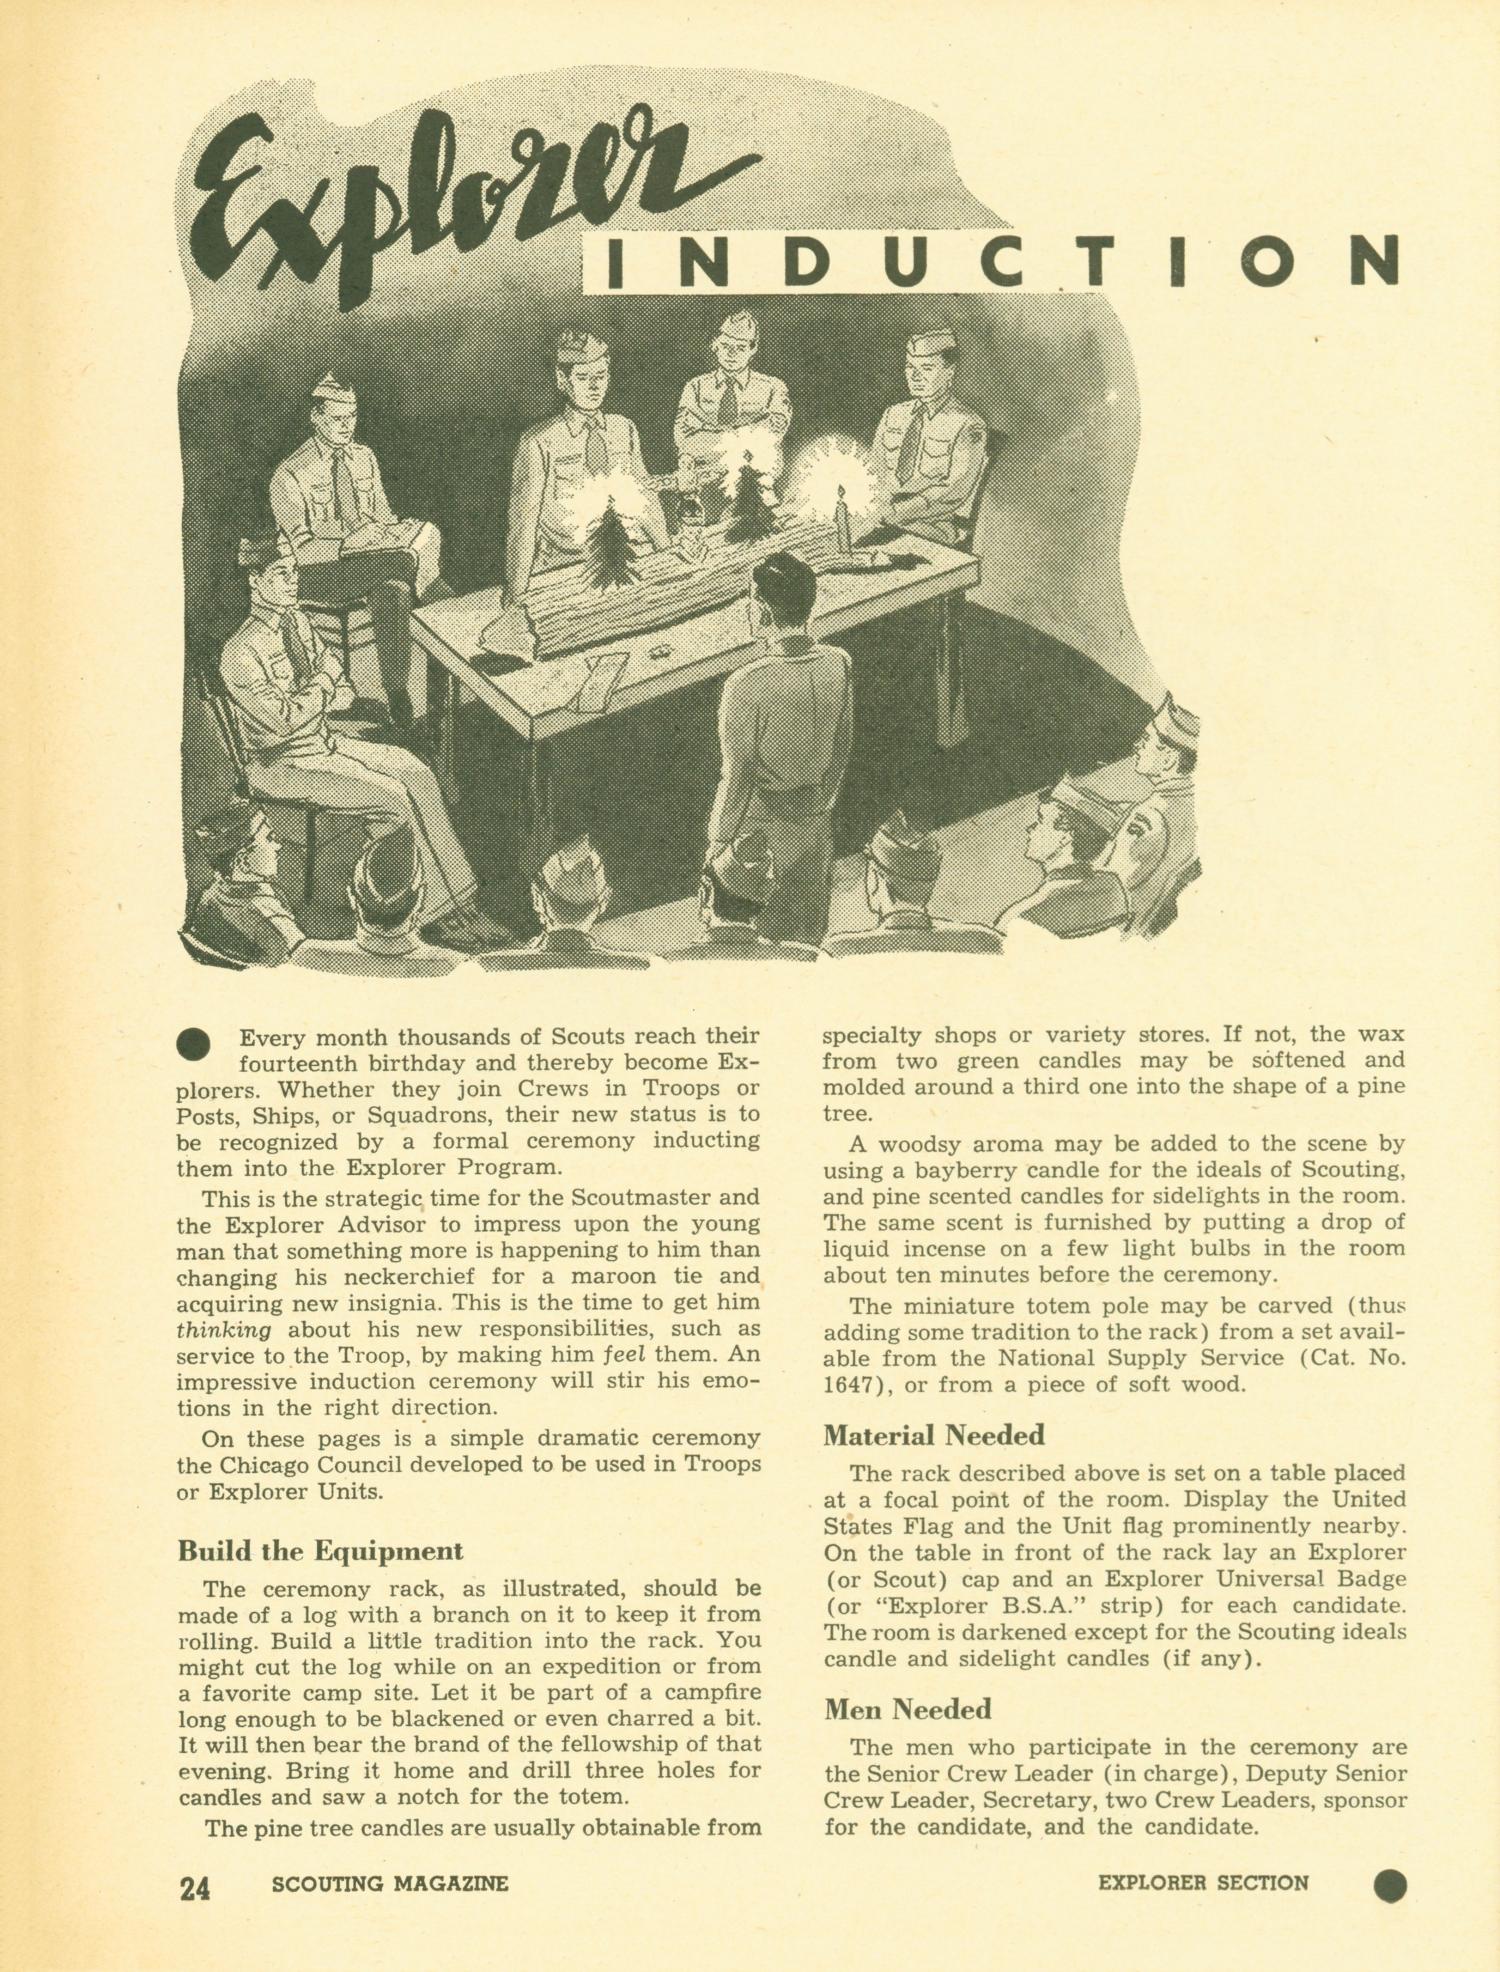 Scouting, Volume 38, Number 3, March 1950
                                                
                                                    24
                                                